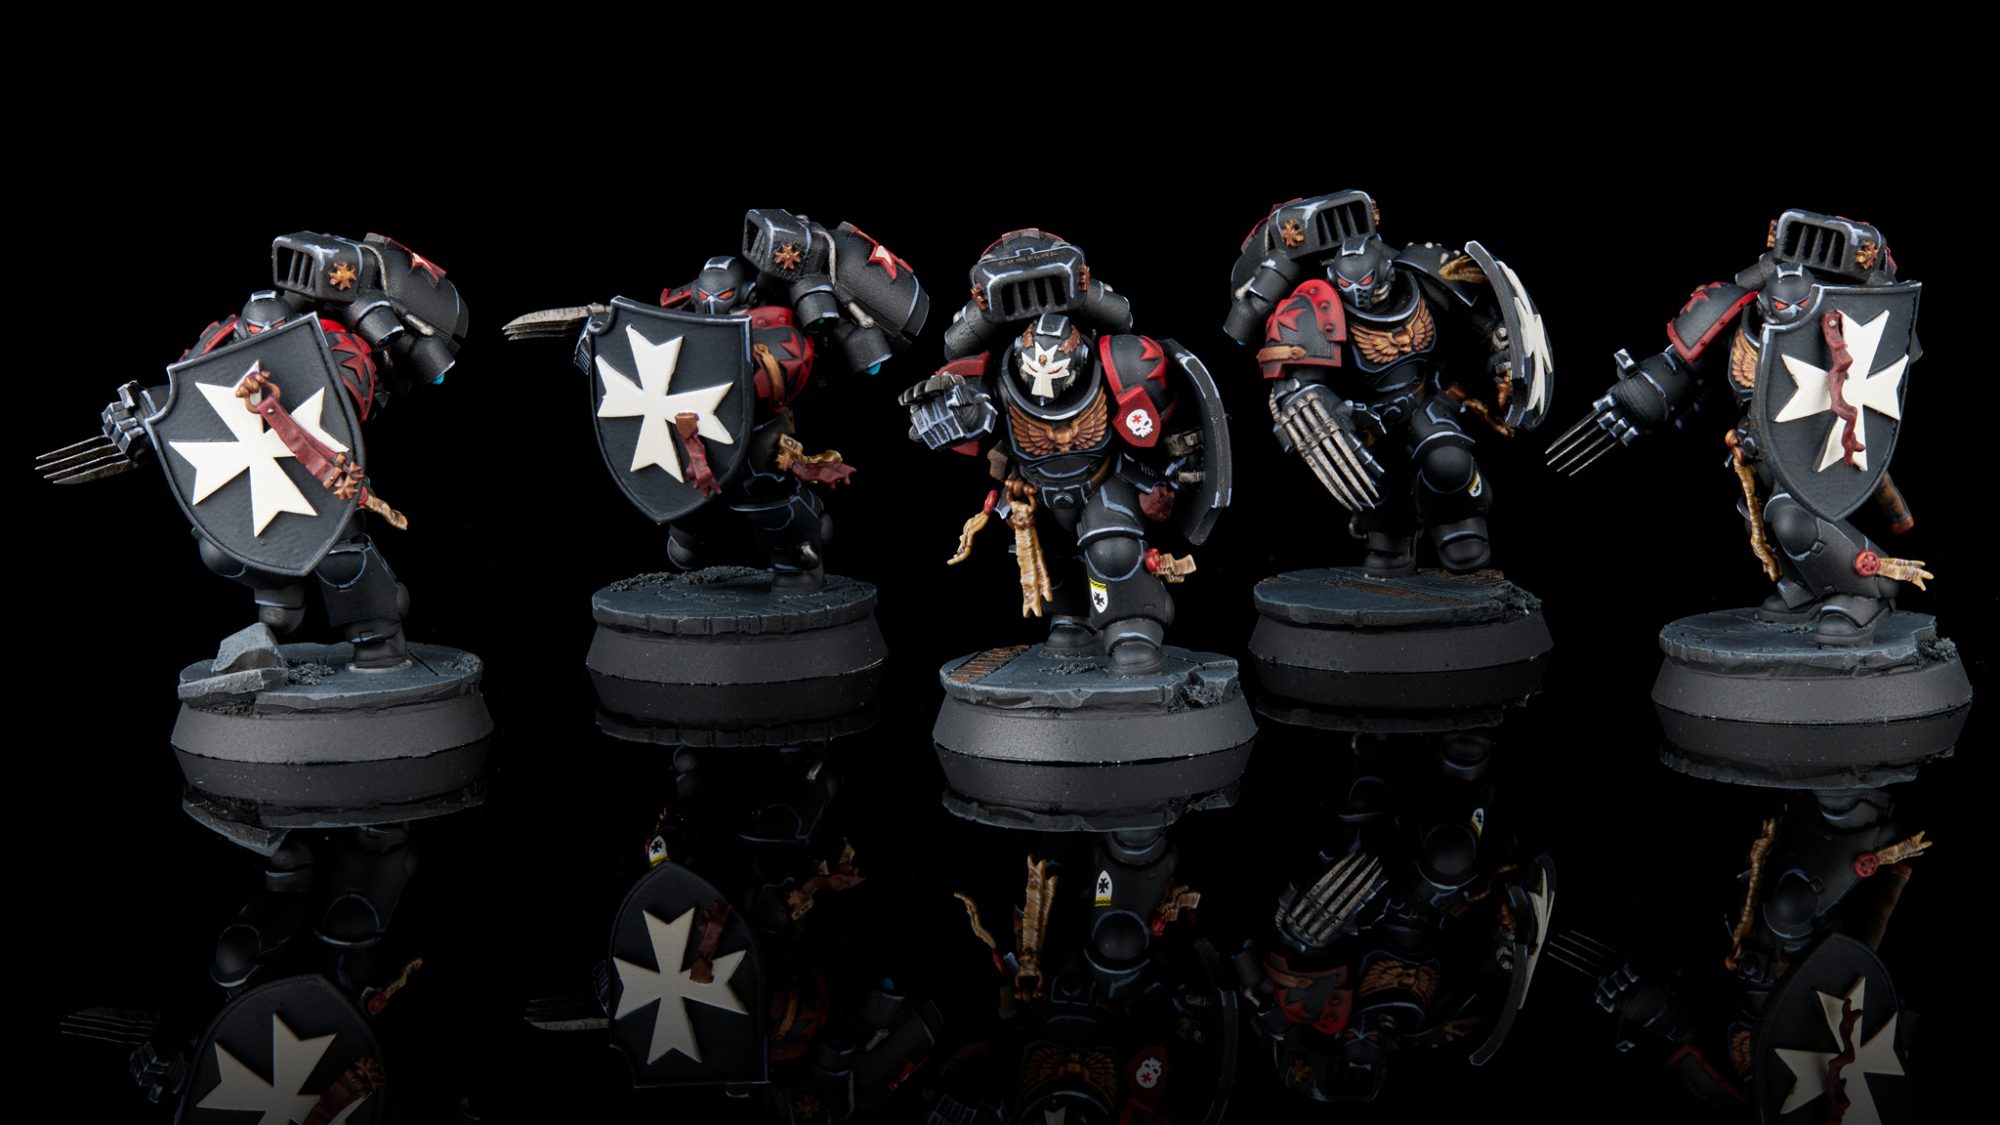 Black Templar Vanguard Veterans with storm shields and lightning claws